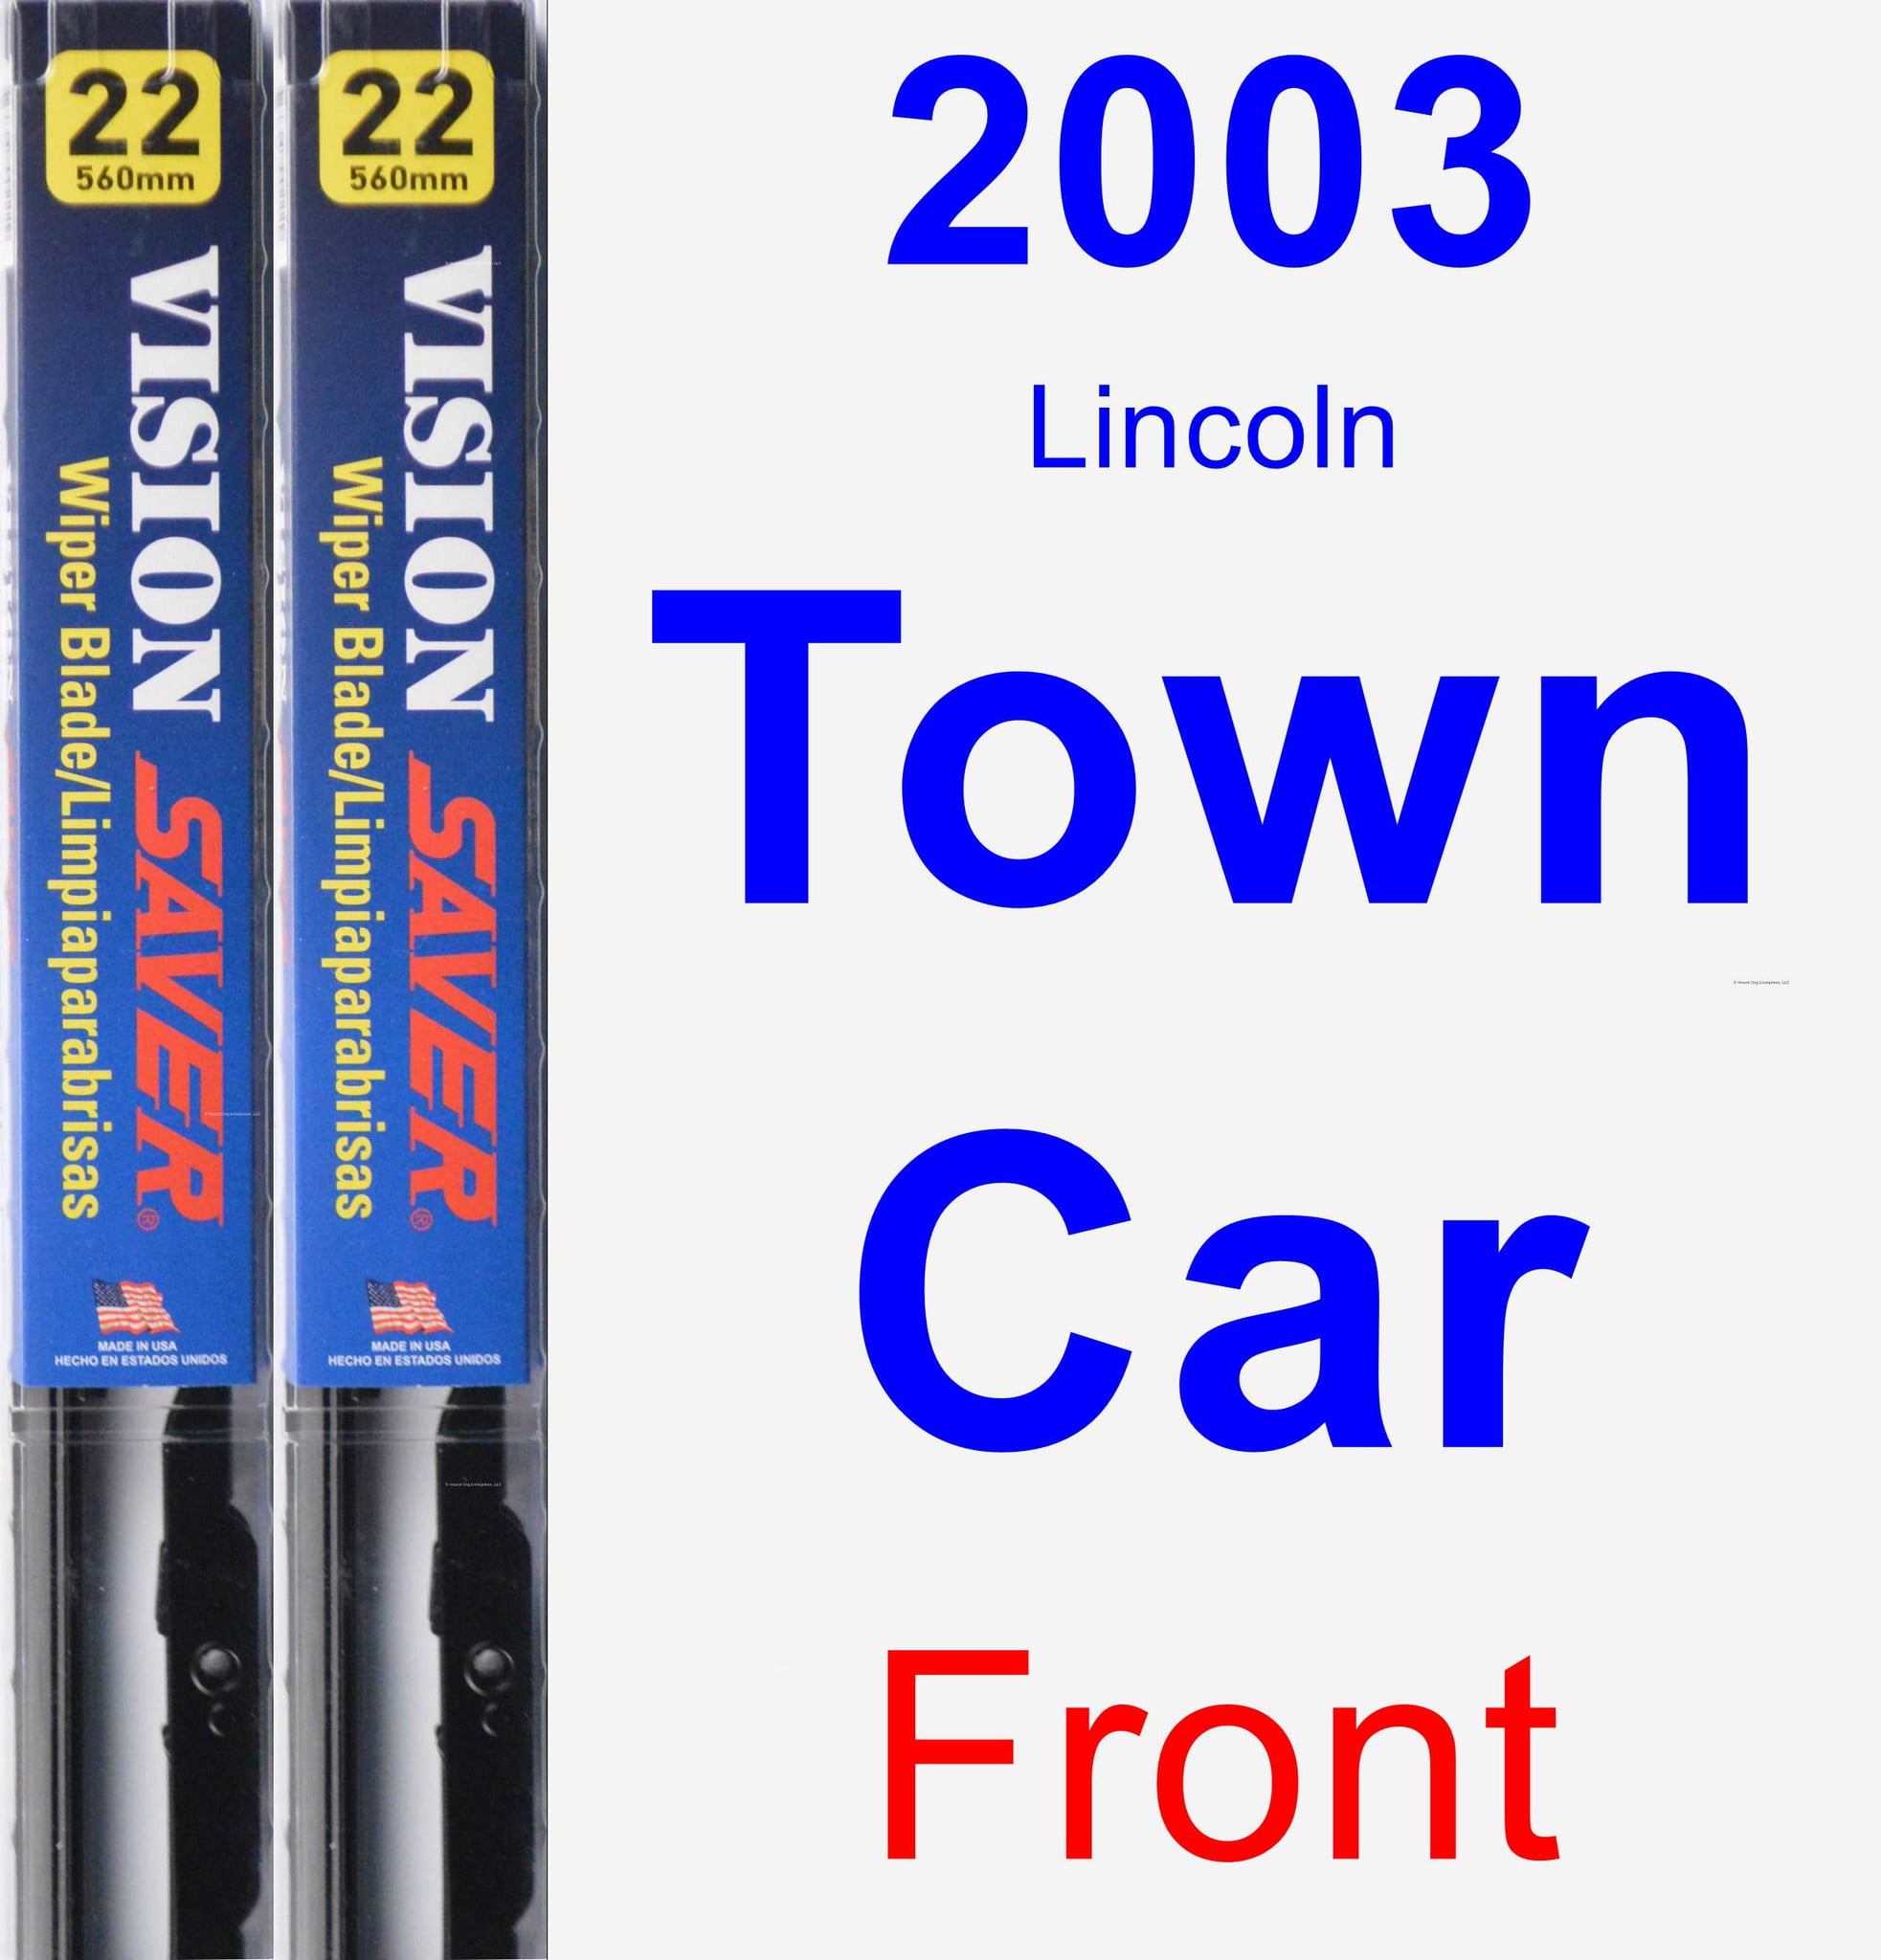 2003 Lincoln Town Car Wiper Blade Size